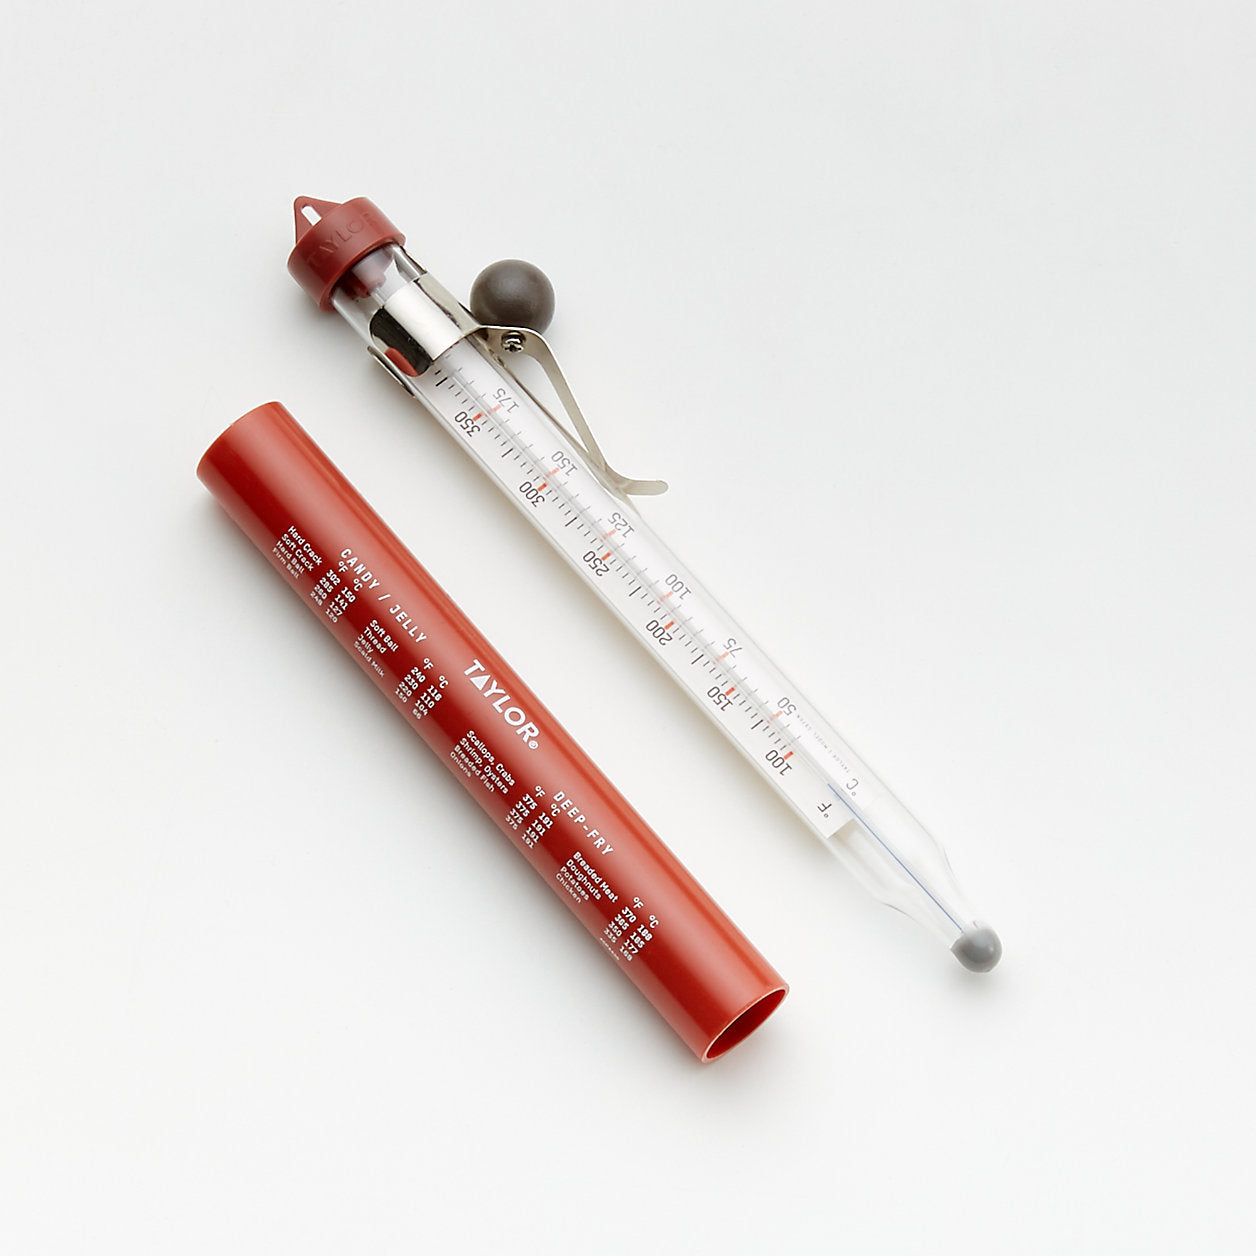 Candlemaking Thermometer - Candy Thermometer for Candlemaking